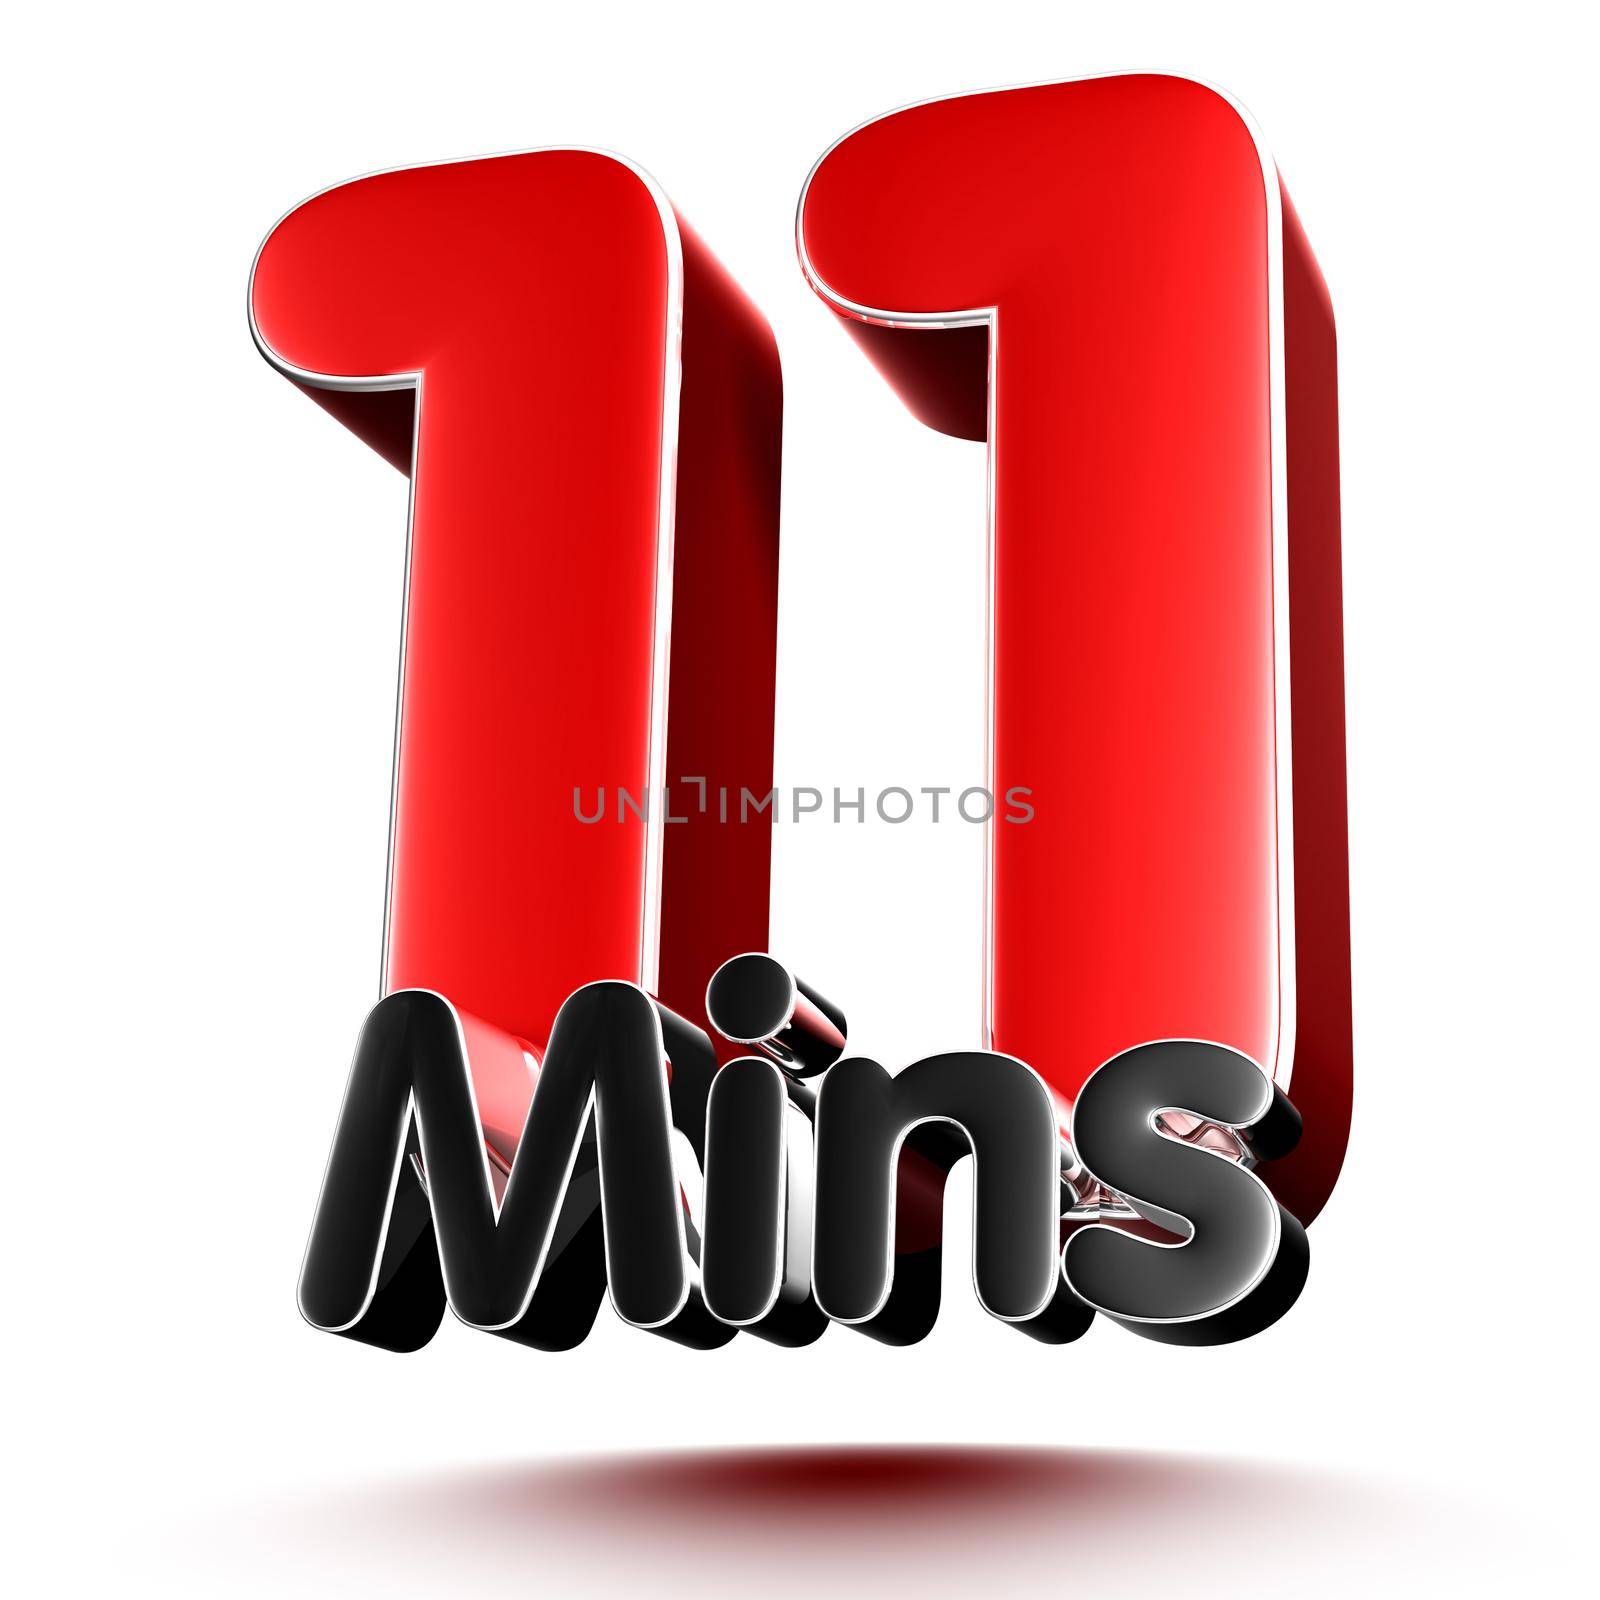 11 mins isolated on white background illustration 3D rendering with clipping path.